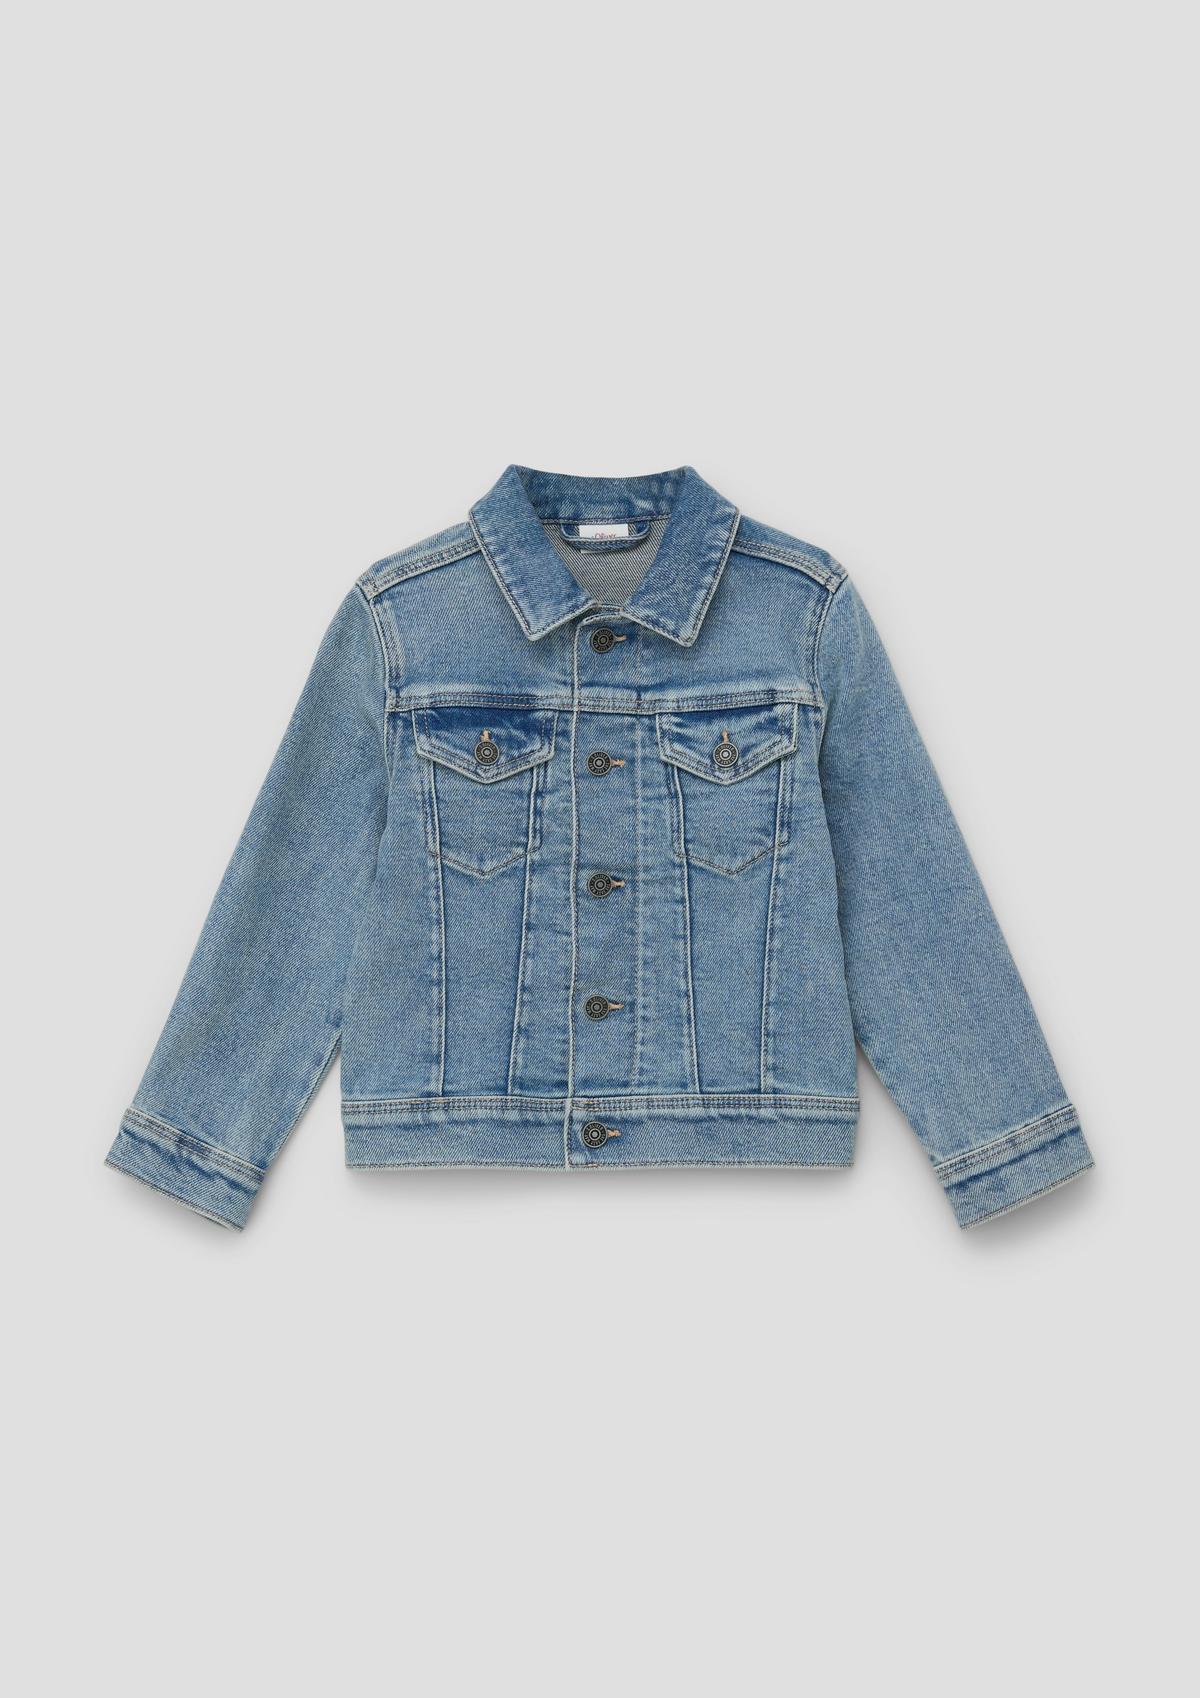 s.Oliver Denim jacket in a semi-fitted design